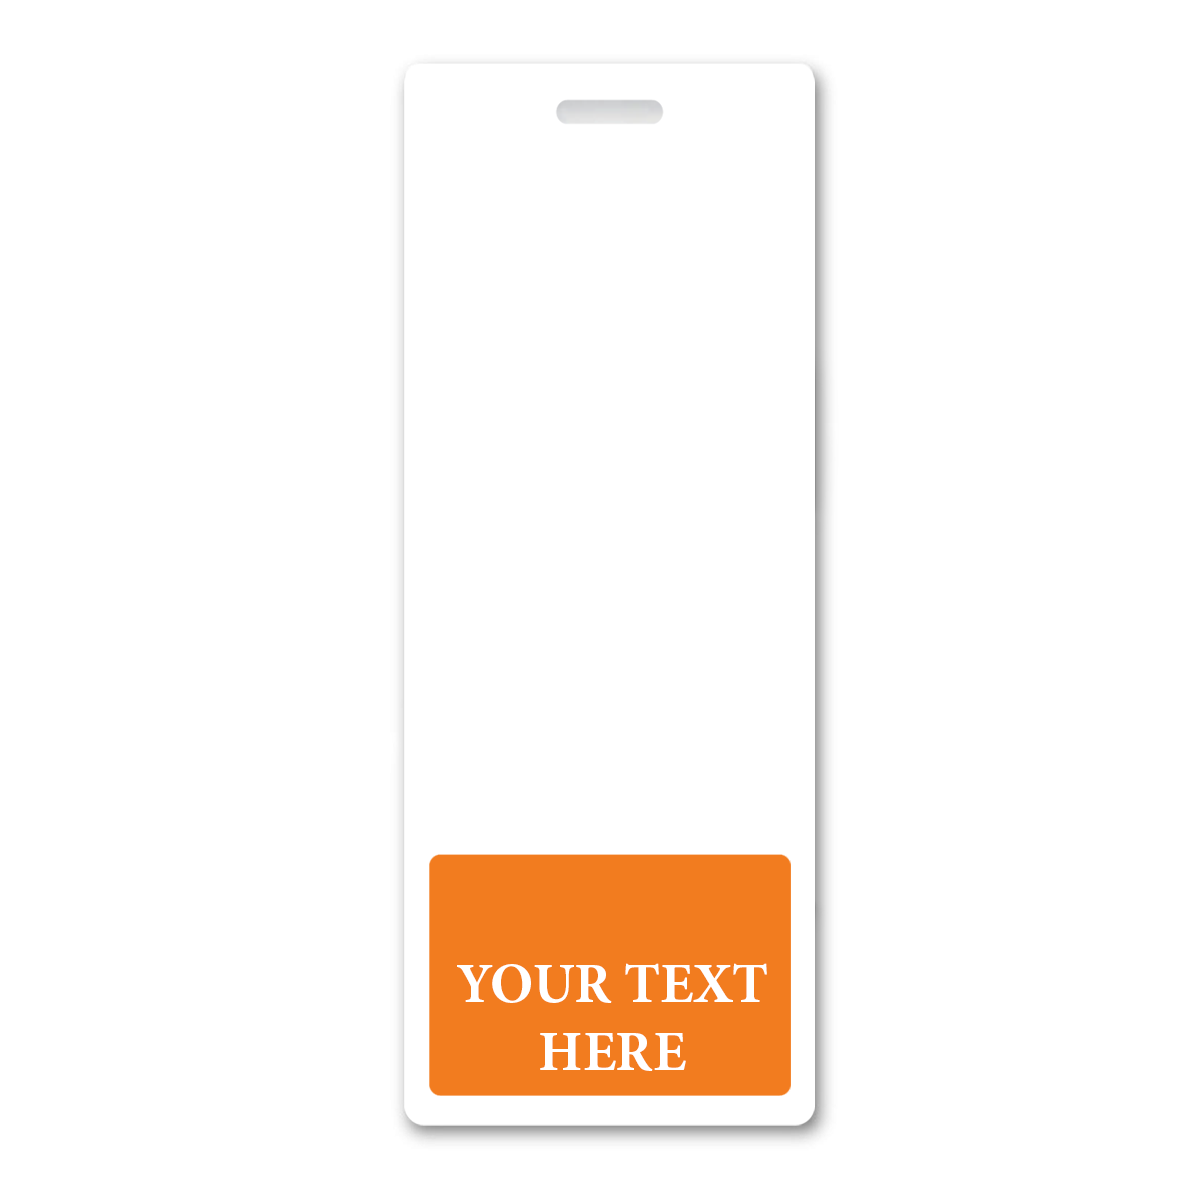 White rectangular tag with a slot at the top for hanging and an orange section at the bottom labeled "YOUR TEXT HERE." Perfect for use as Oversized Custom Vertical Badge Buddy XL- (Extra Large Size), enhancing your Identification Cards with personalized labels.